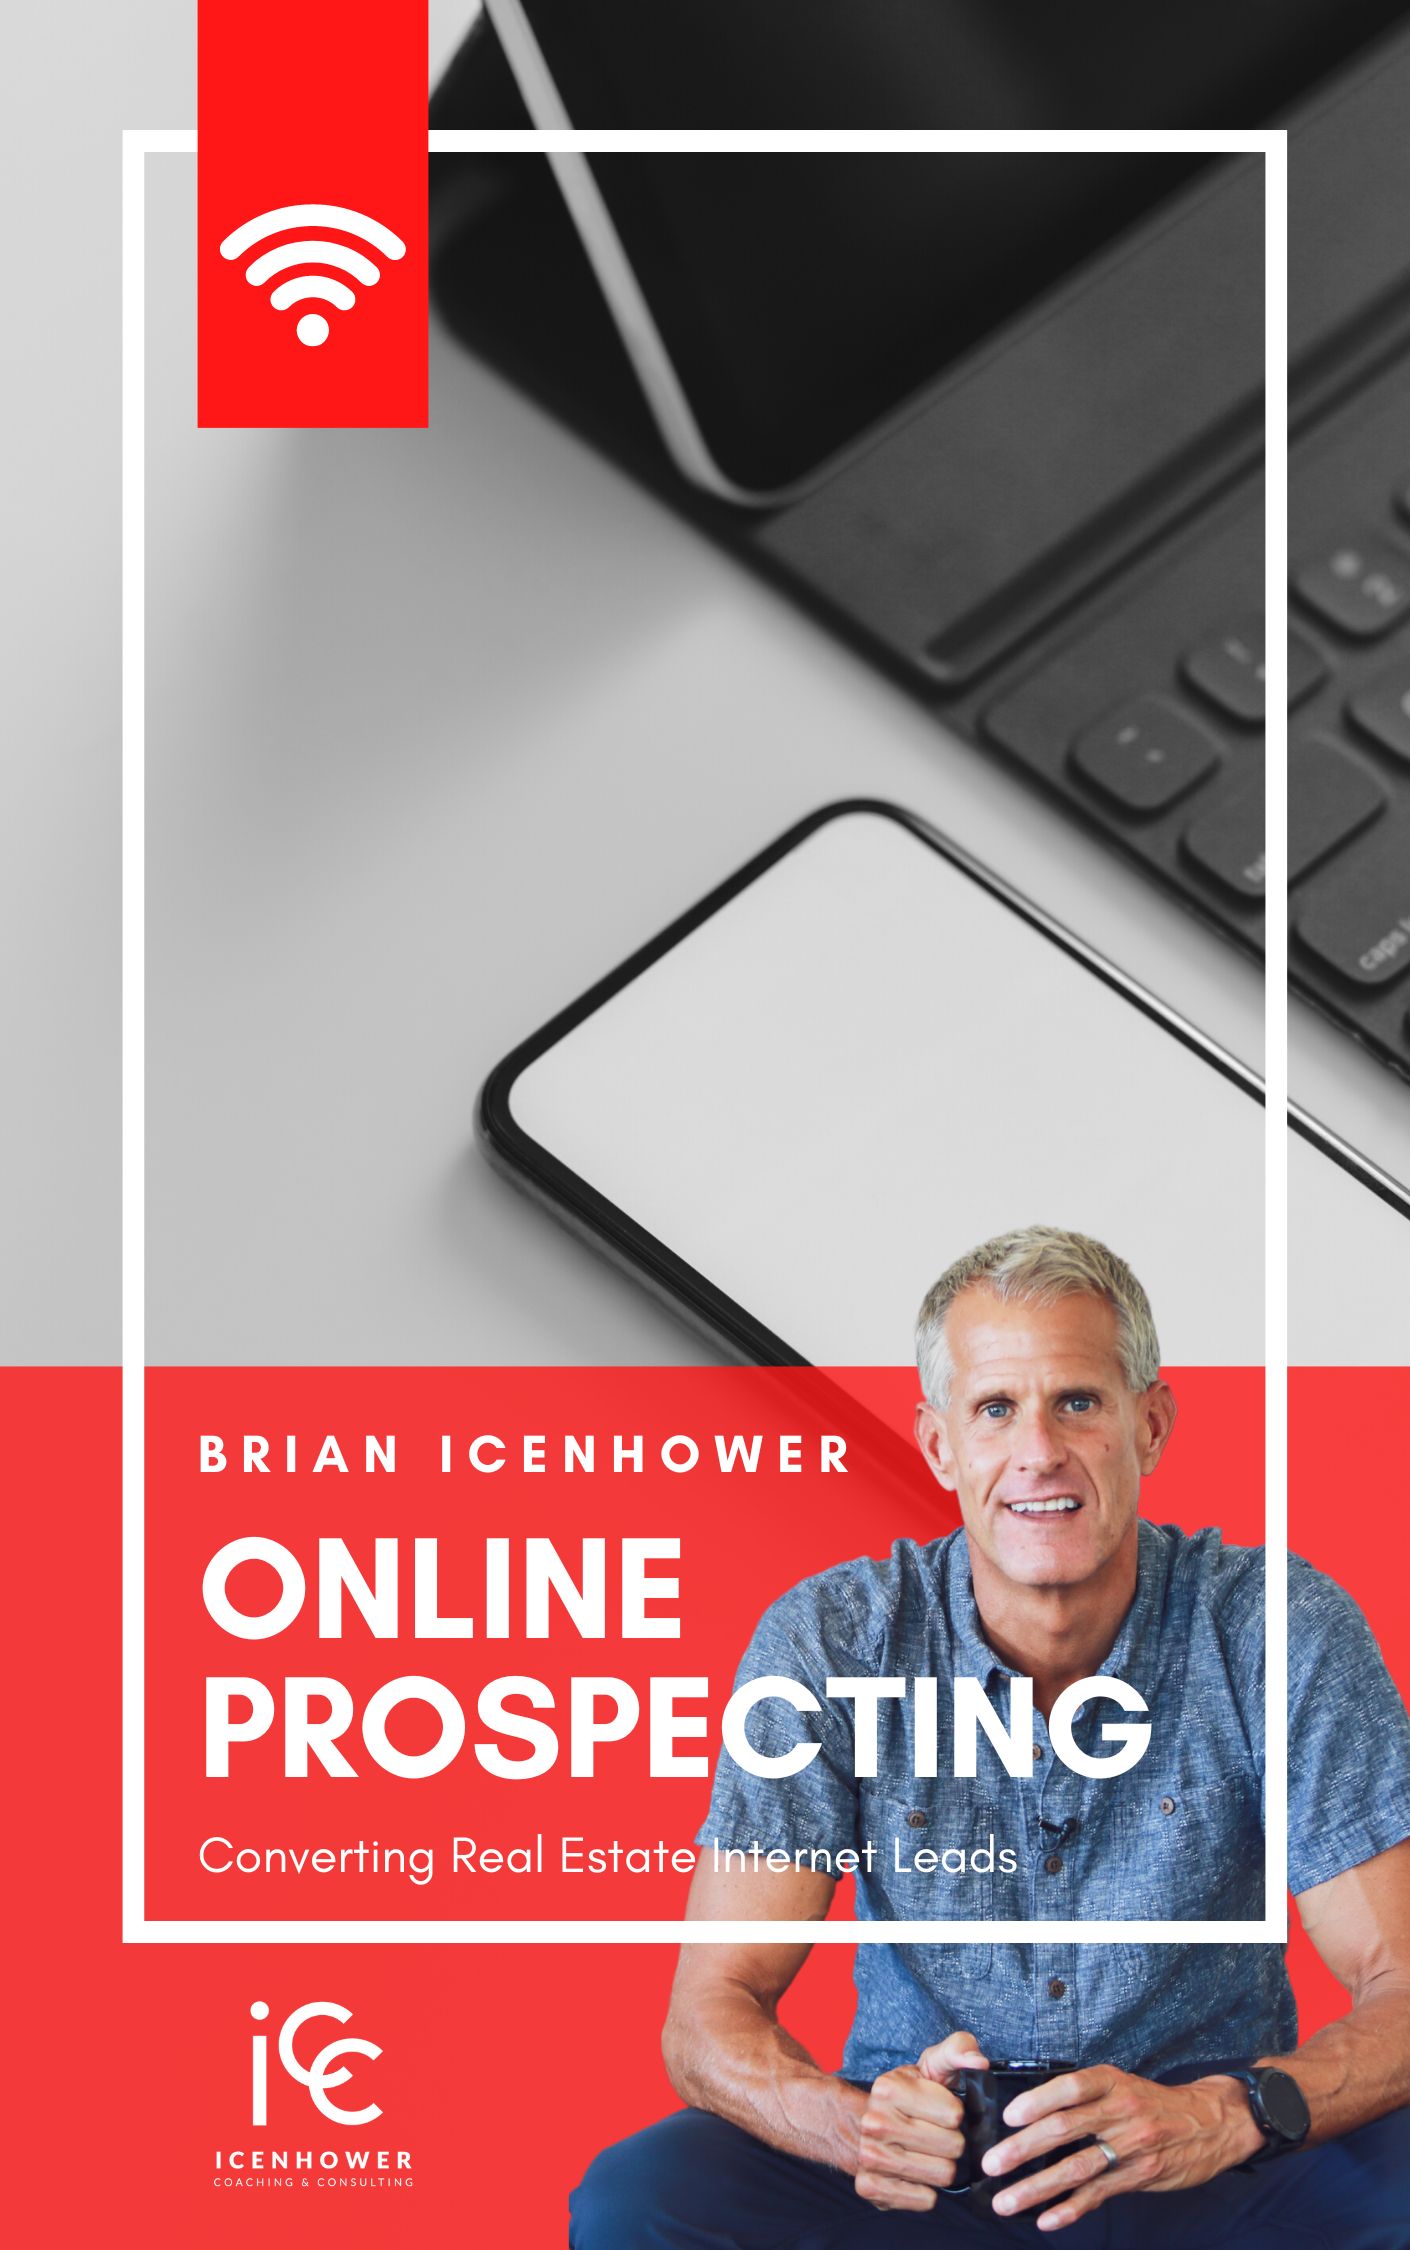 ONLINE PROSPECTING: Converting Real Estate Internet Leads